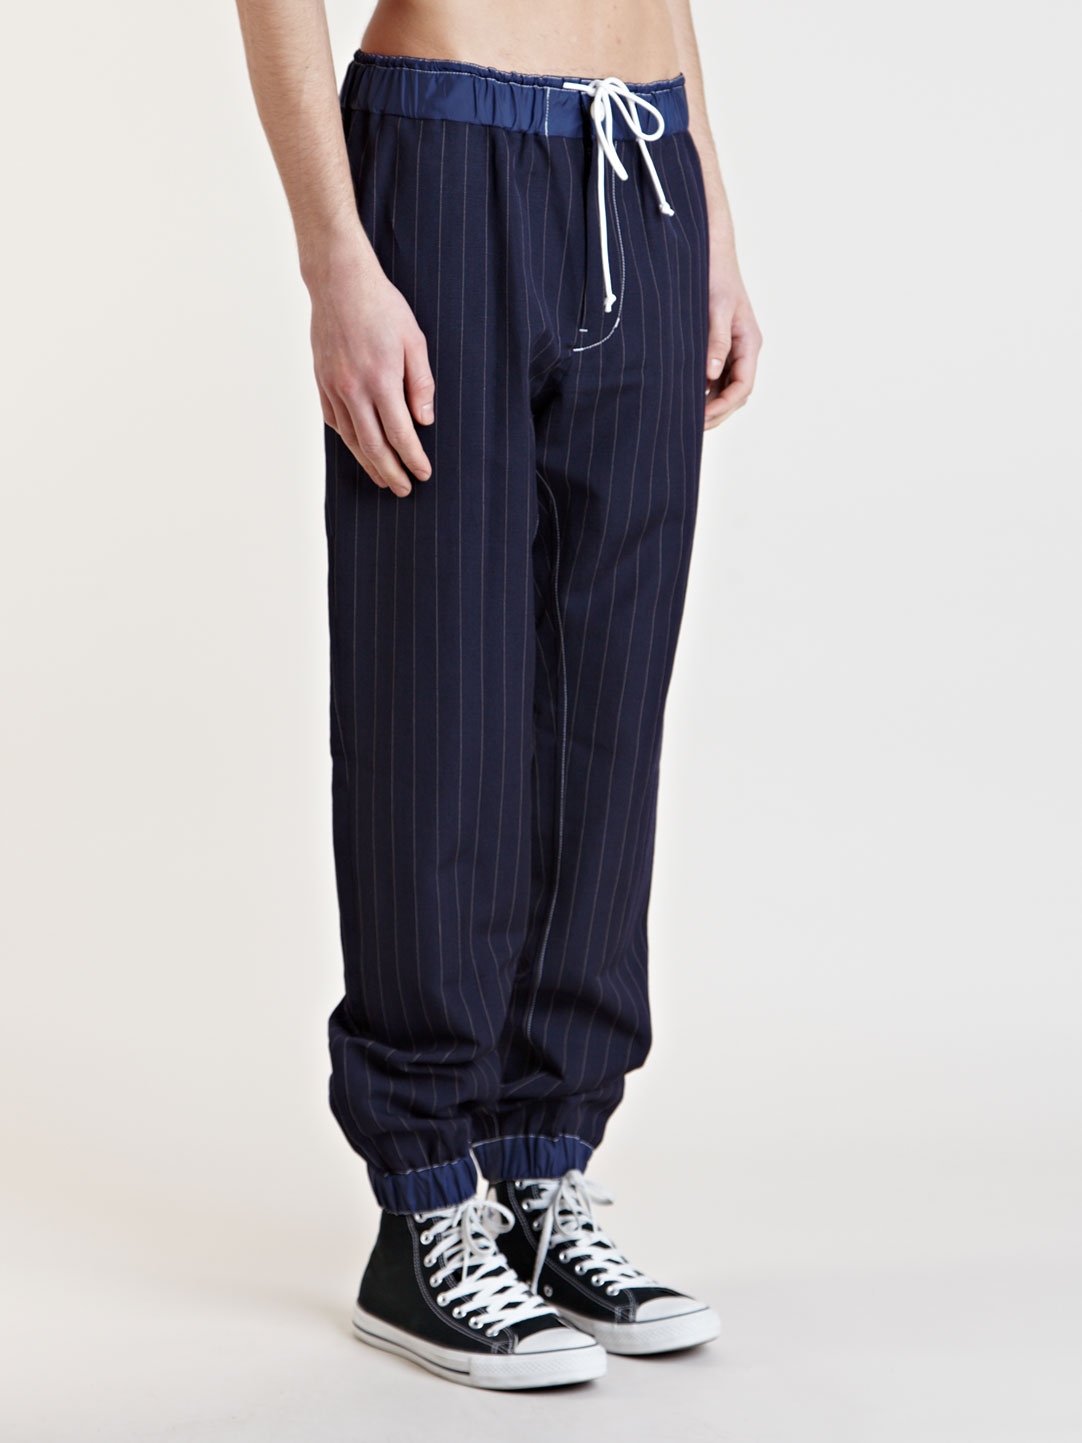 Sacai Mens Pin Striped Pants in Blue - Lyst